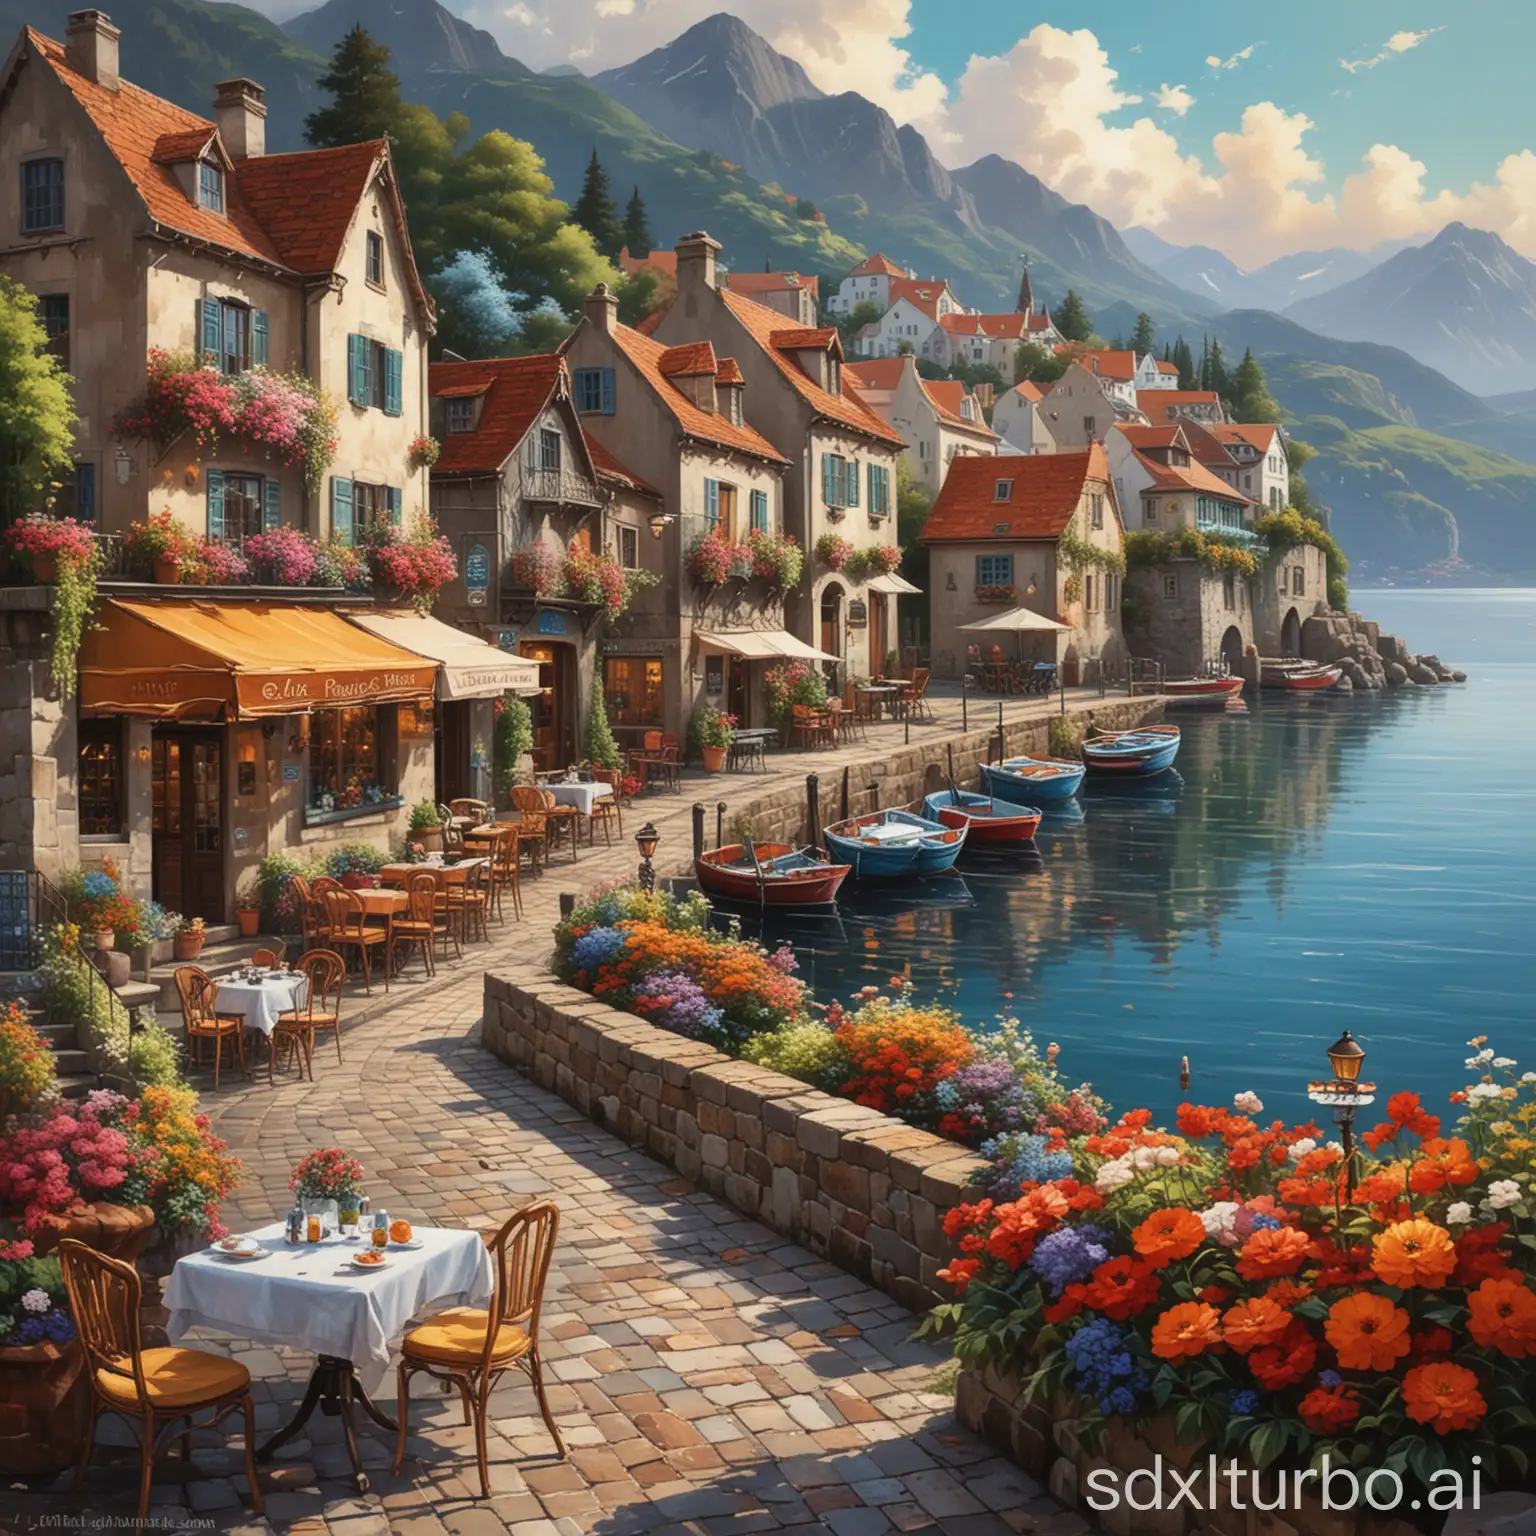 This oil painting captures a picturesque coastal town with cobblestone streets, lakeside view, vibrant flowers, charming cafe, and elegant buildings. The painting masterfully blends dark fantasy elements with fashion, creating a unique visual experience. The vibrant painting showcases a charming cafe, distant mountains, and a serene atmosphere.